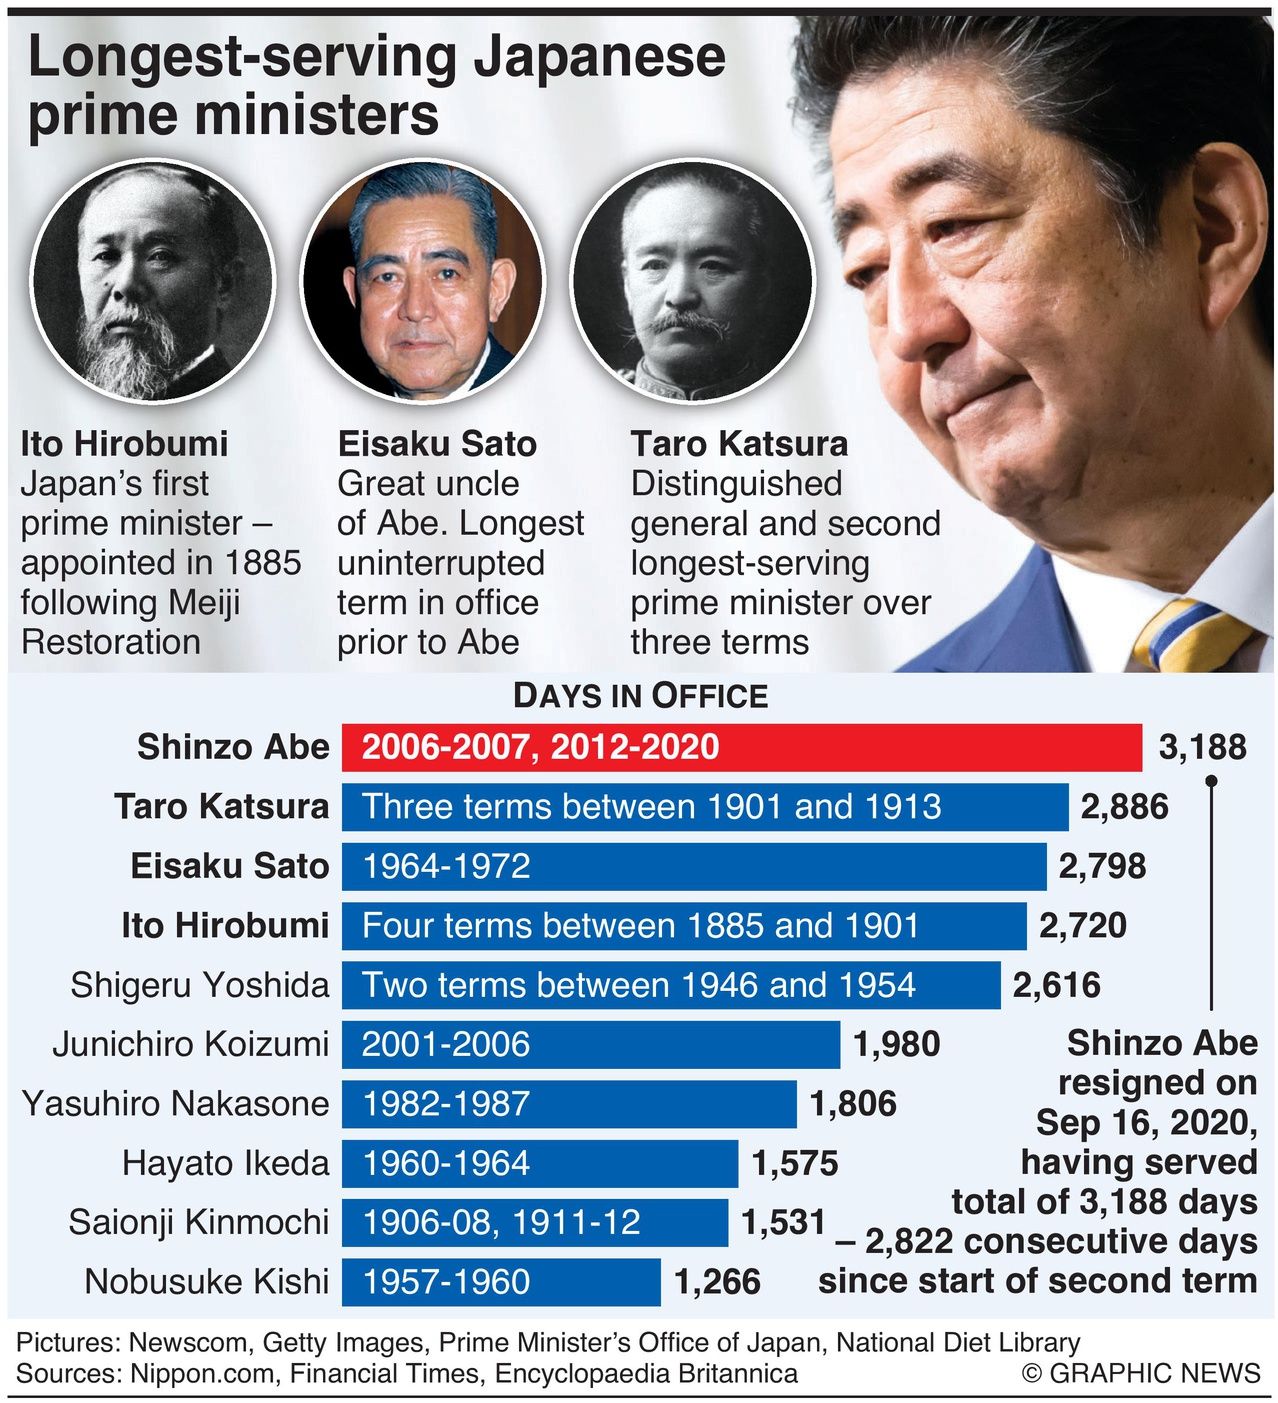 Infographic showing who were Japan's longest serving prime ministers